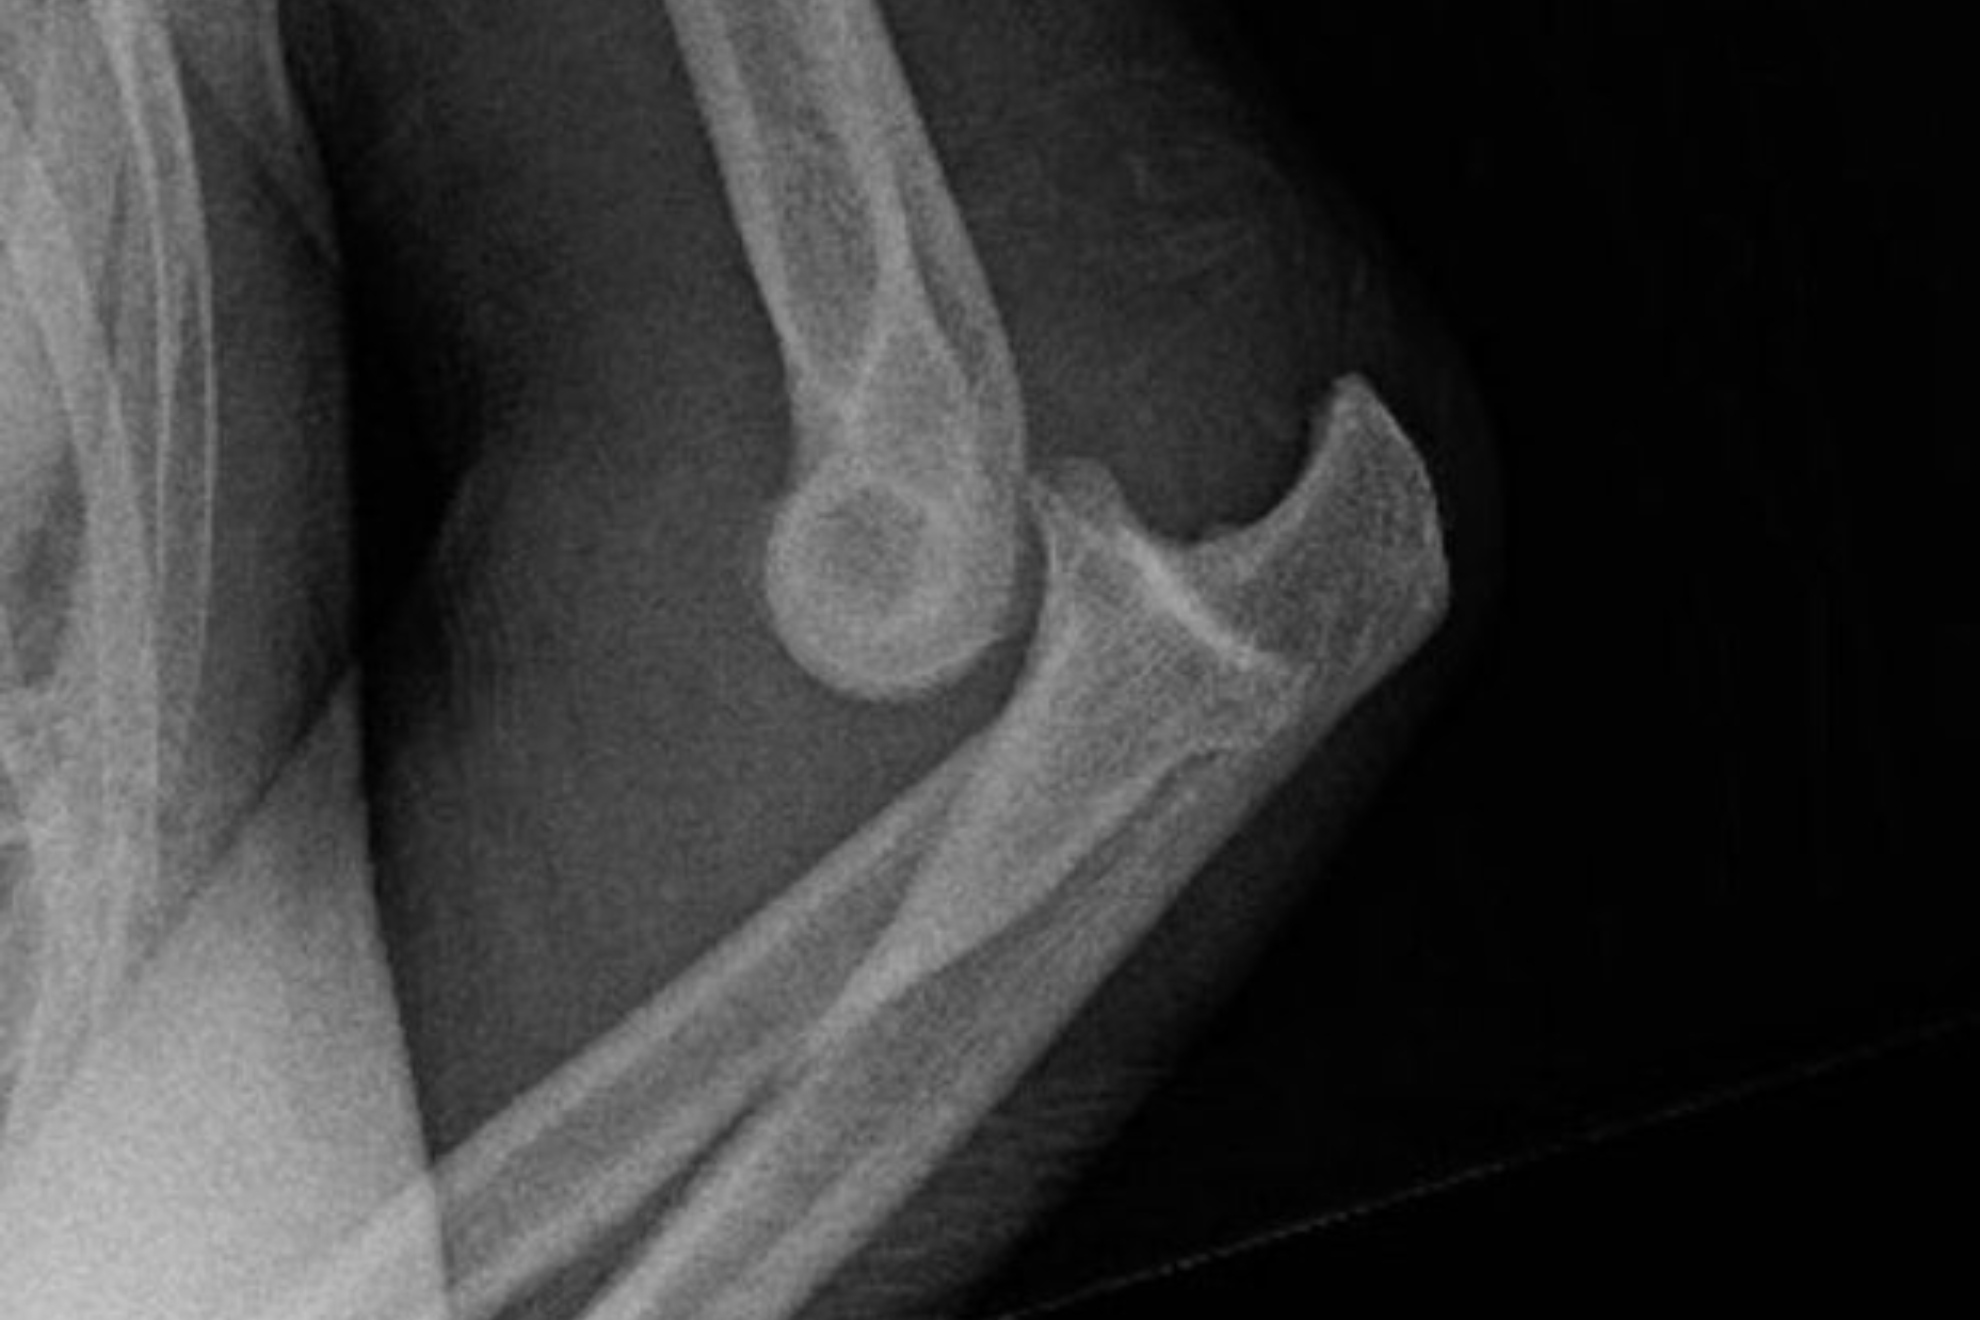 Dana White shares brutal elbow injury X-Ray from Istela Nunes fight